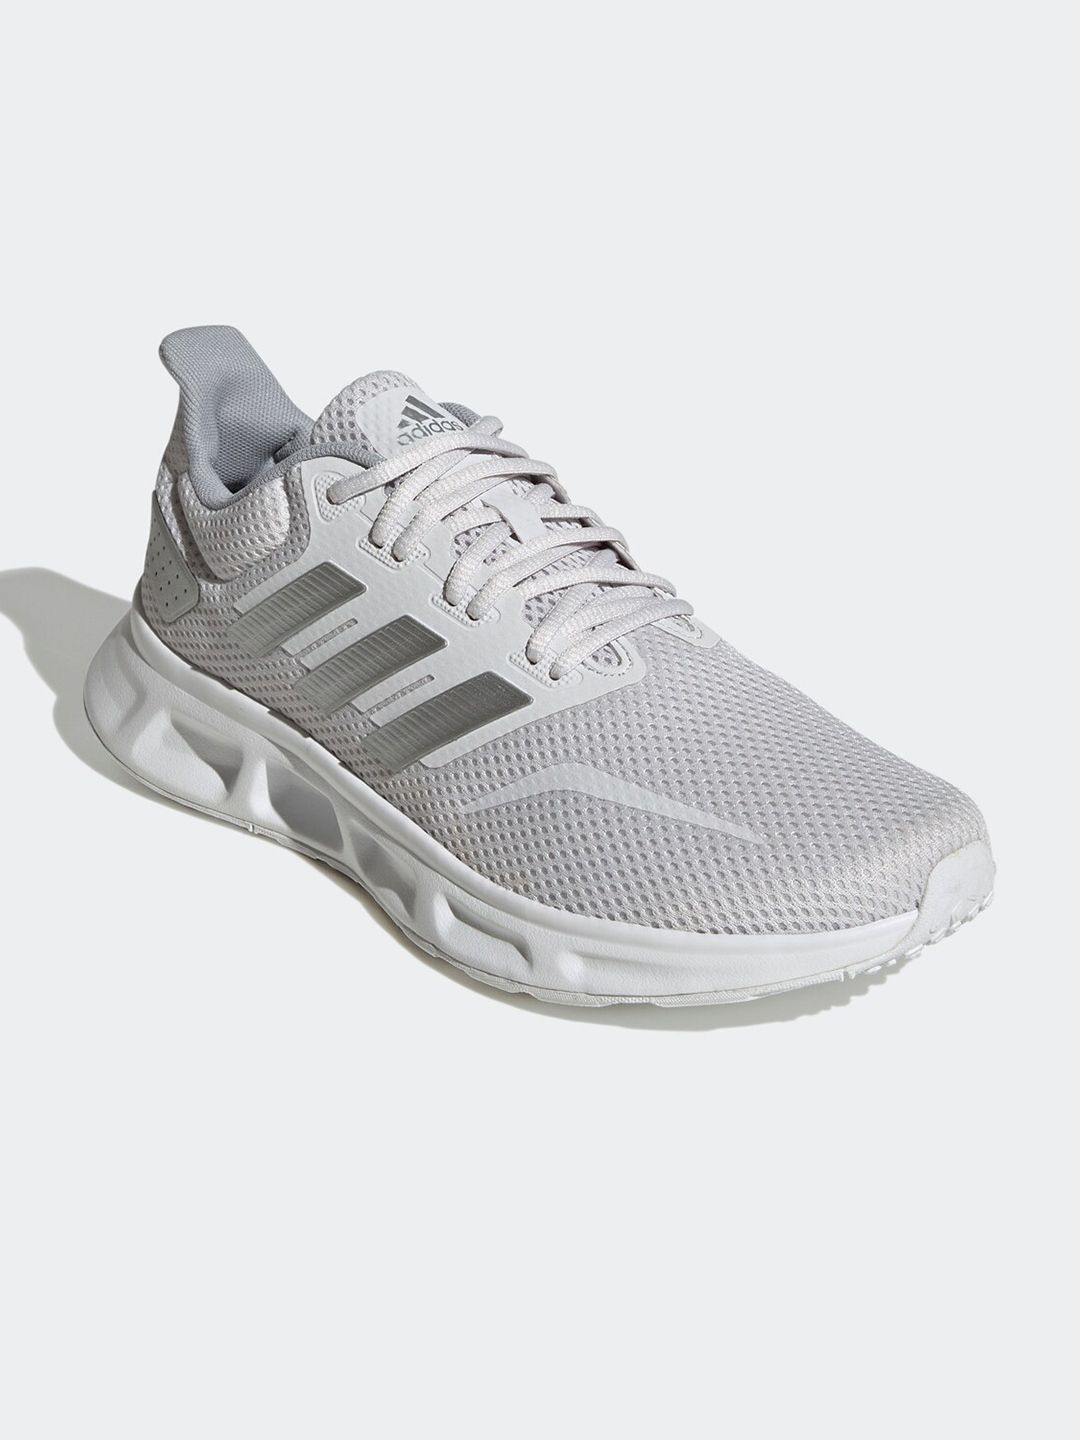 ADIDAS Showtheway 2.0 Running Shoes Price in India